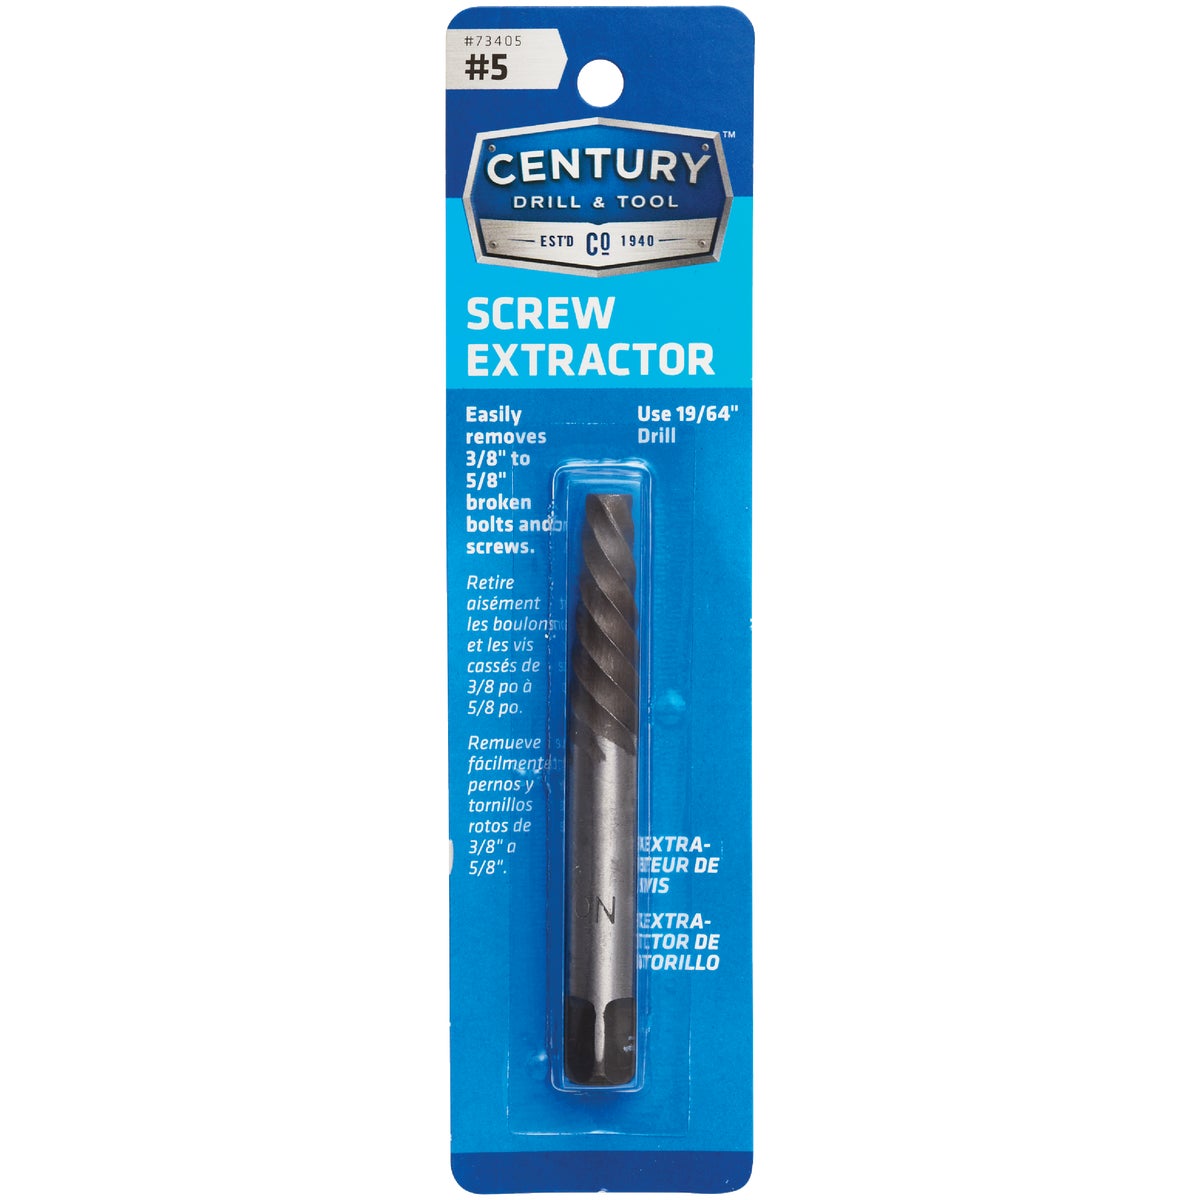 Century Drill & Tool #5 Spiral Flute Screw Extractor